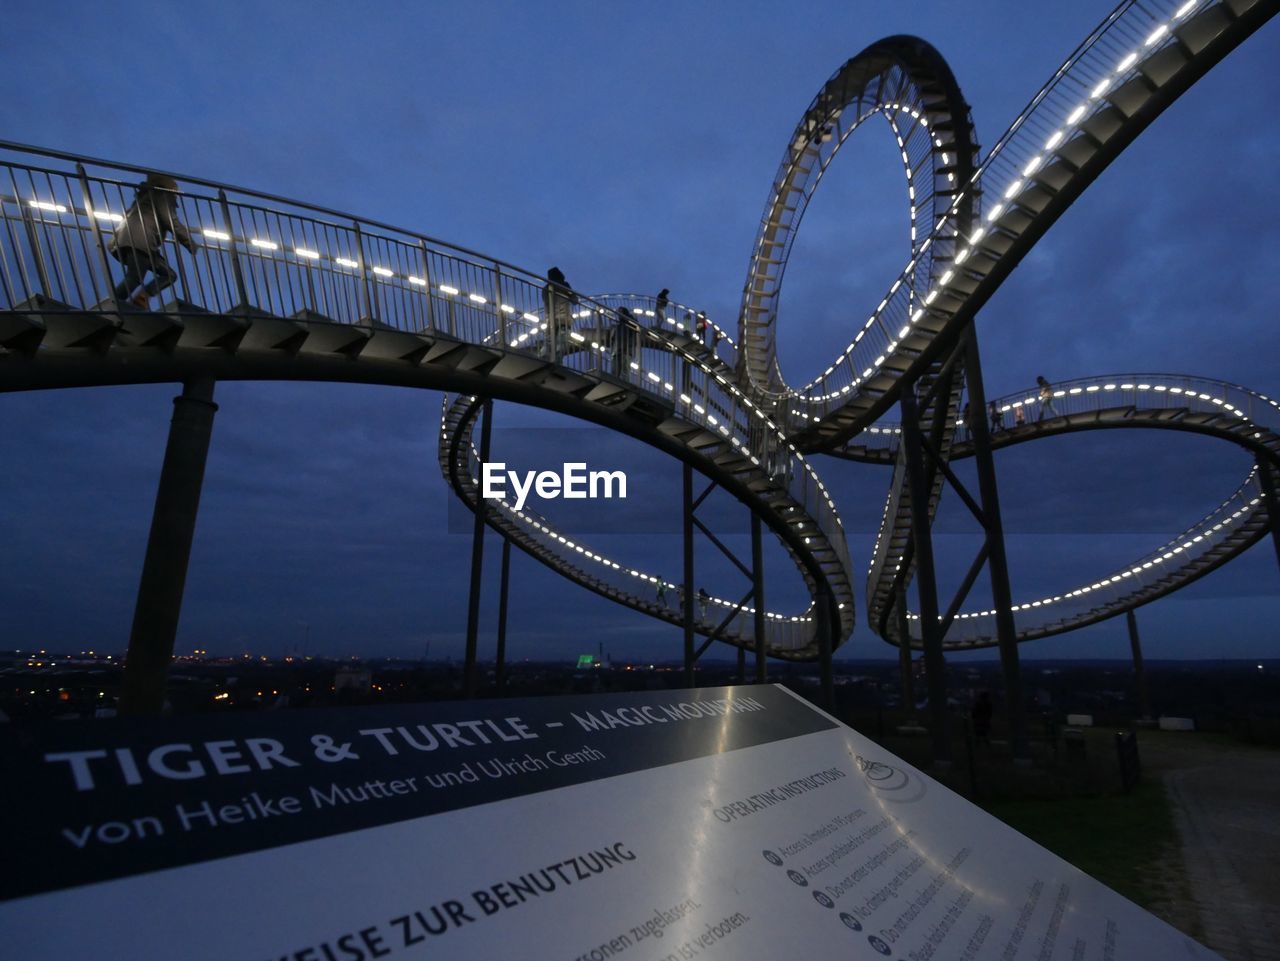 Information sign by illuminated tiger and turtle  magic mountain against sky at dusk